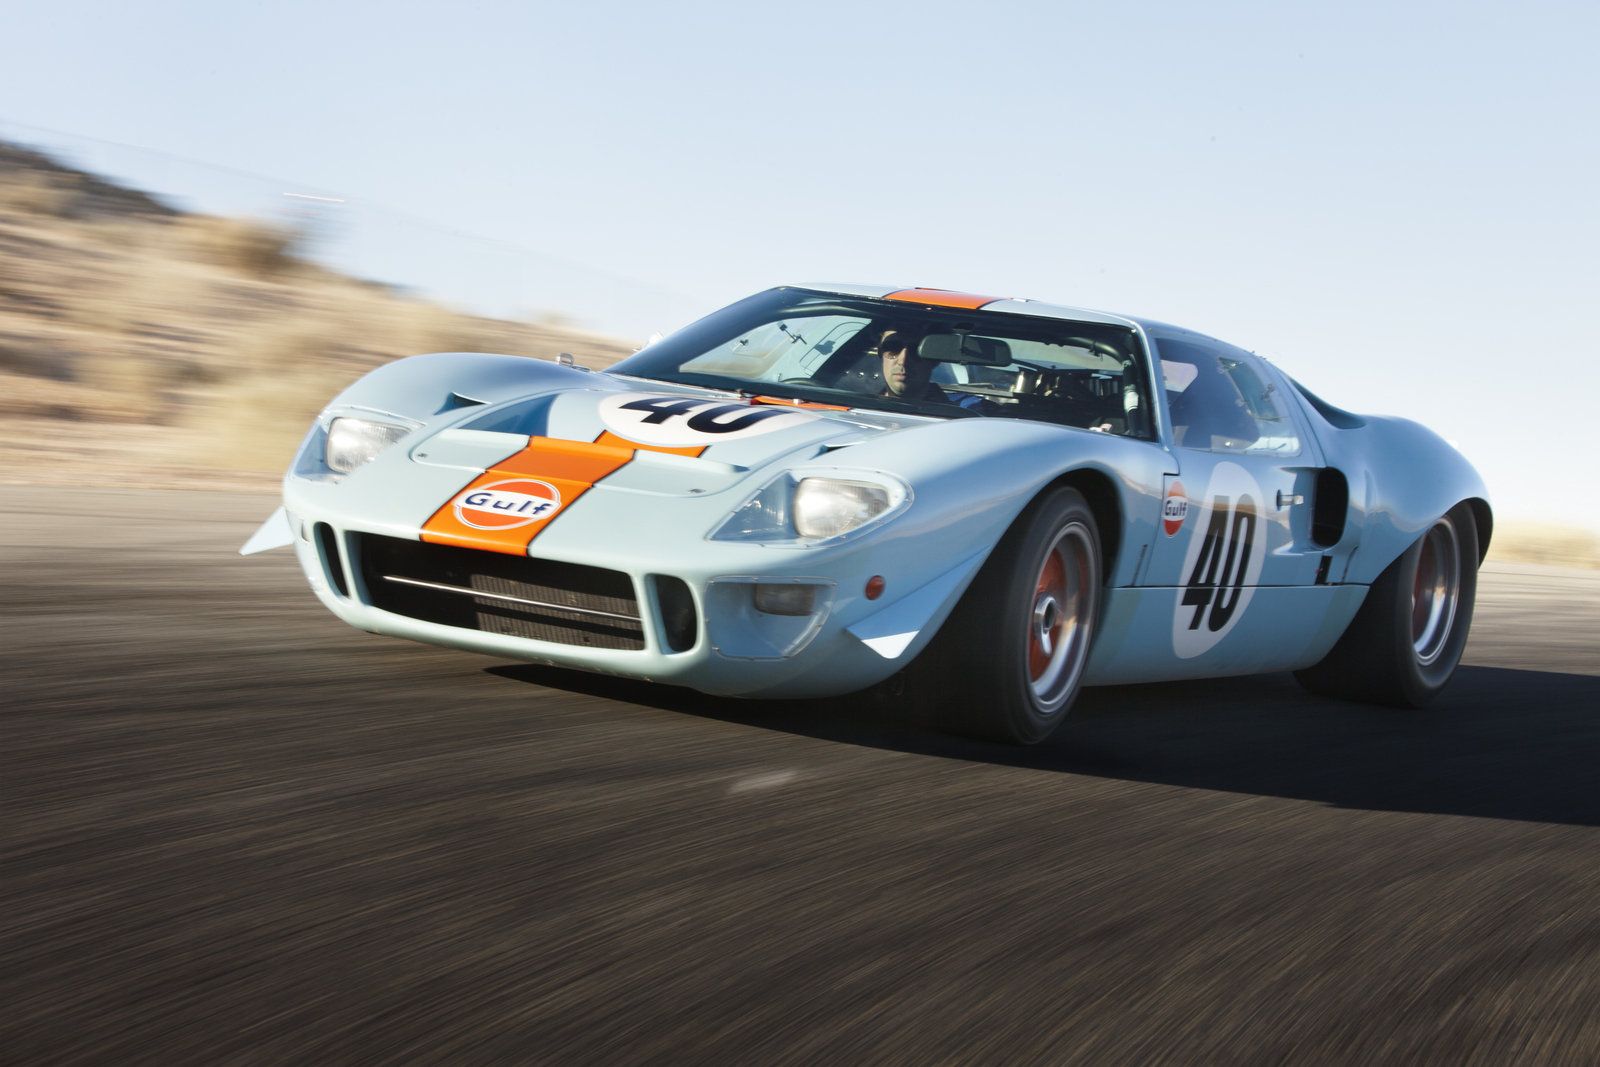 Ford GT40 wallpaper, Vehicles, HQ Ford GT40 pictureK